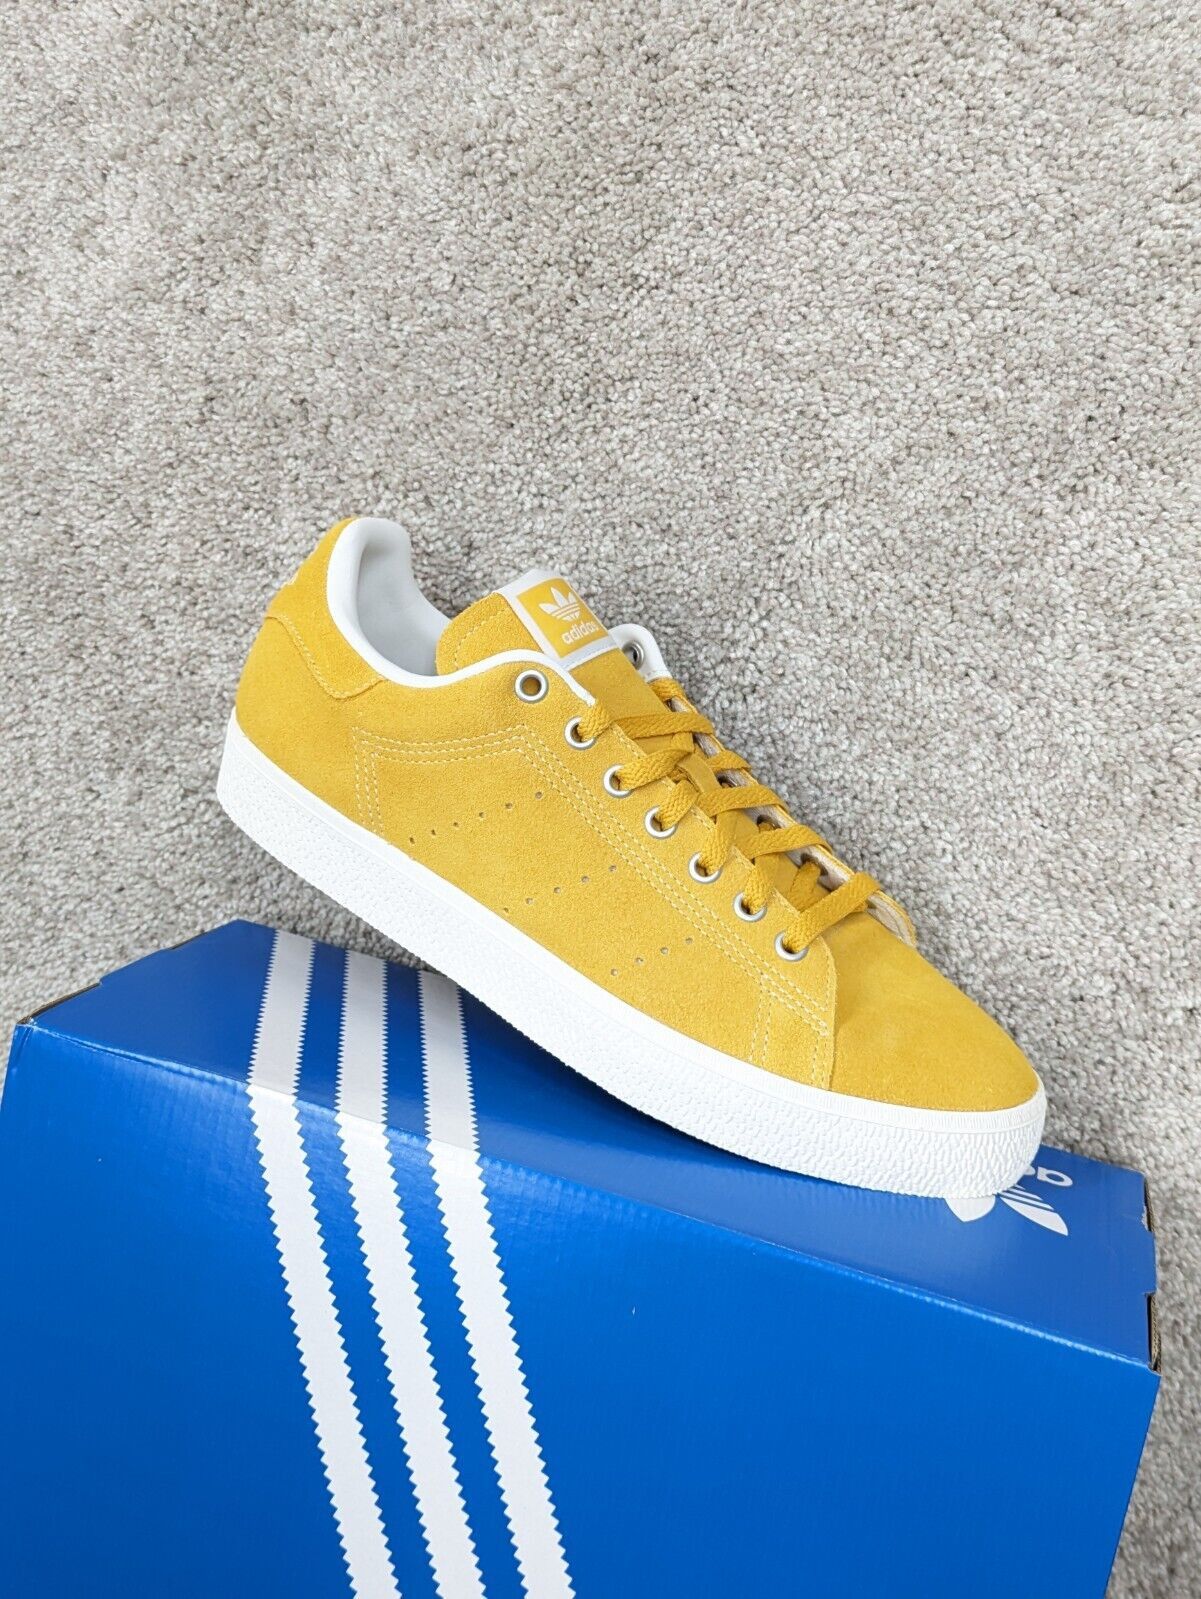 Sneakers Stan Smith CS Shoes Mens 10 Mustard Suede Leather Basketball ...